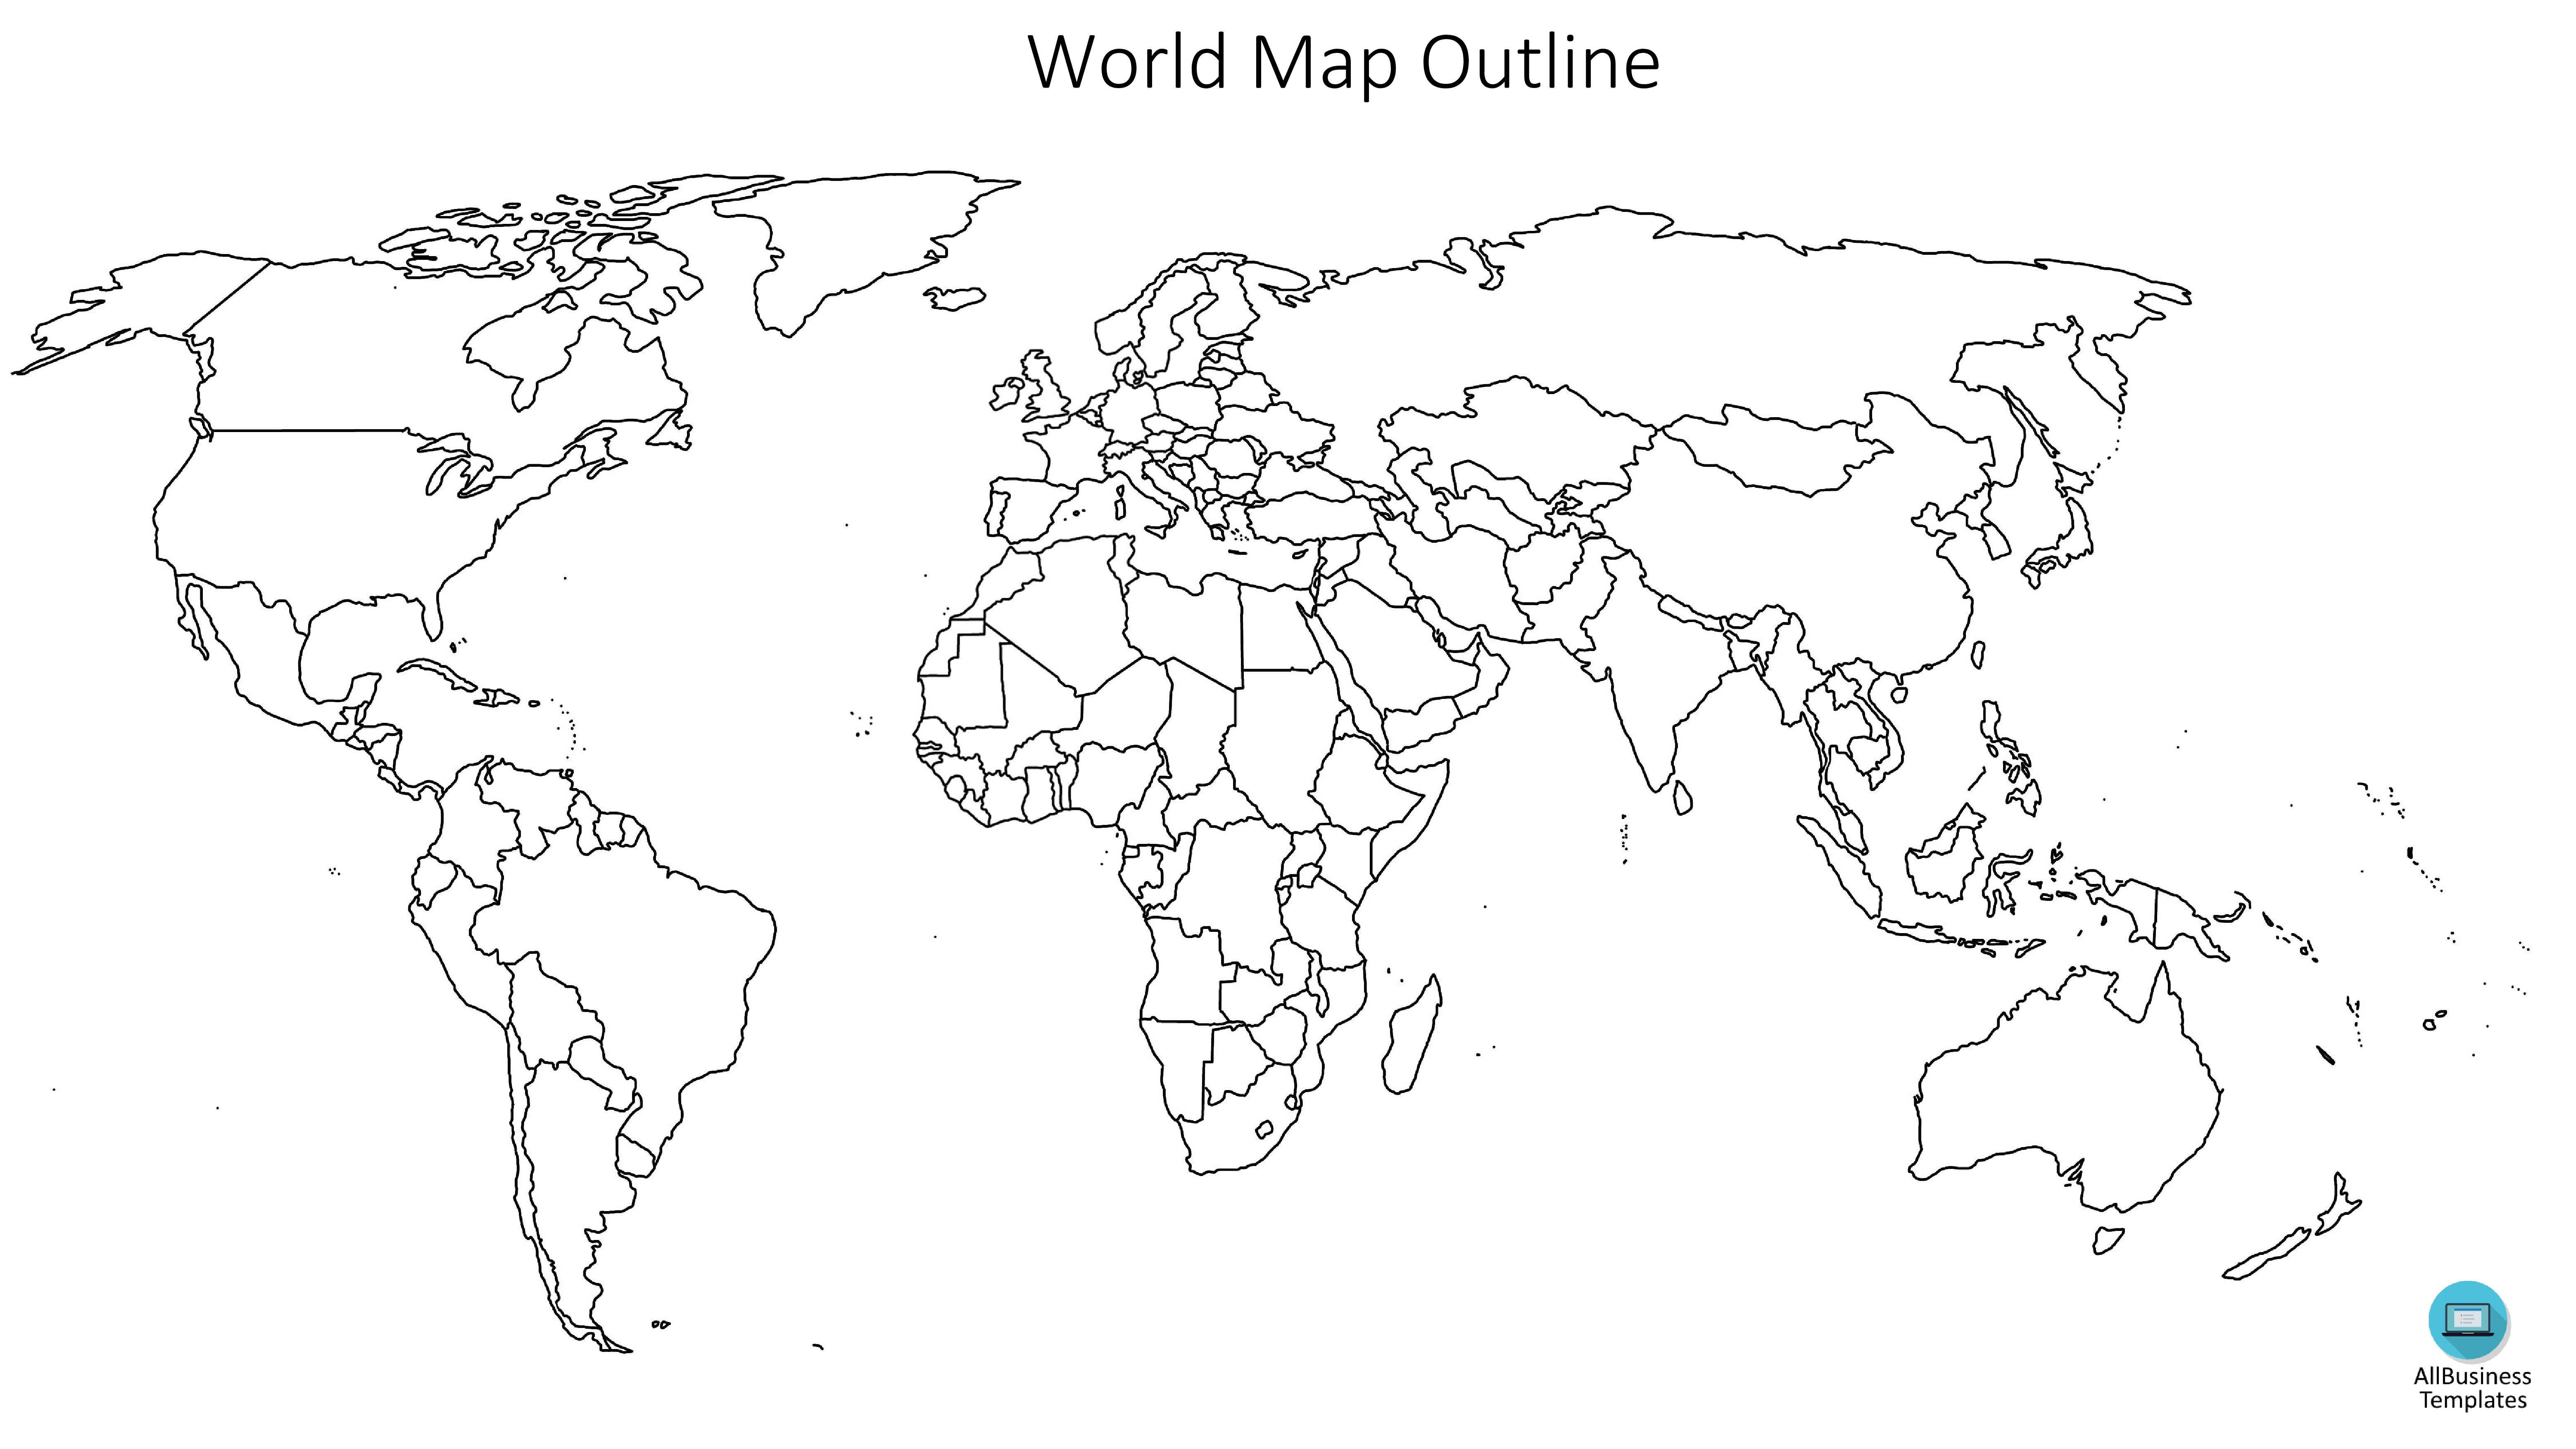 World Map Outline main image